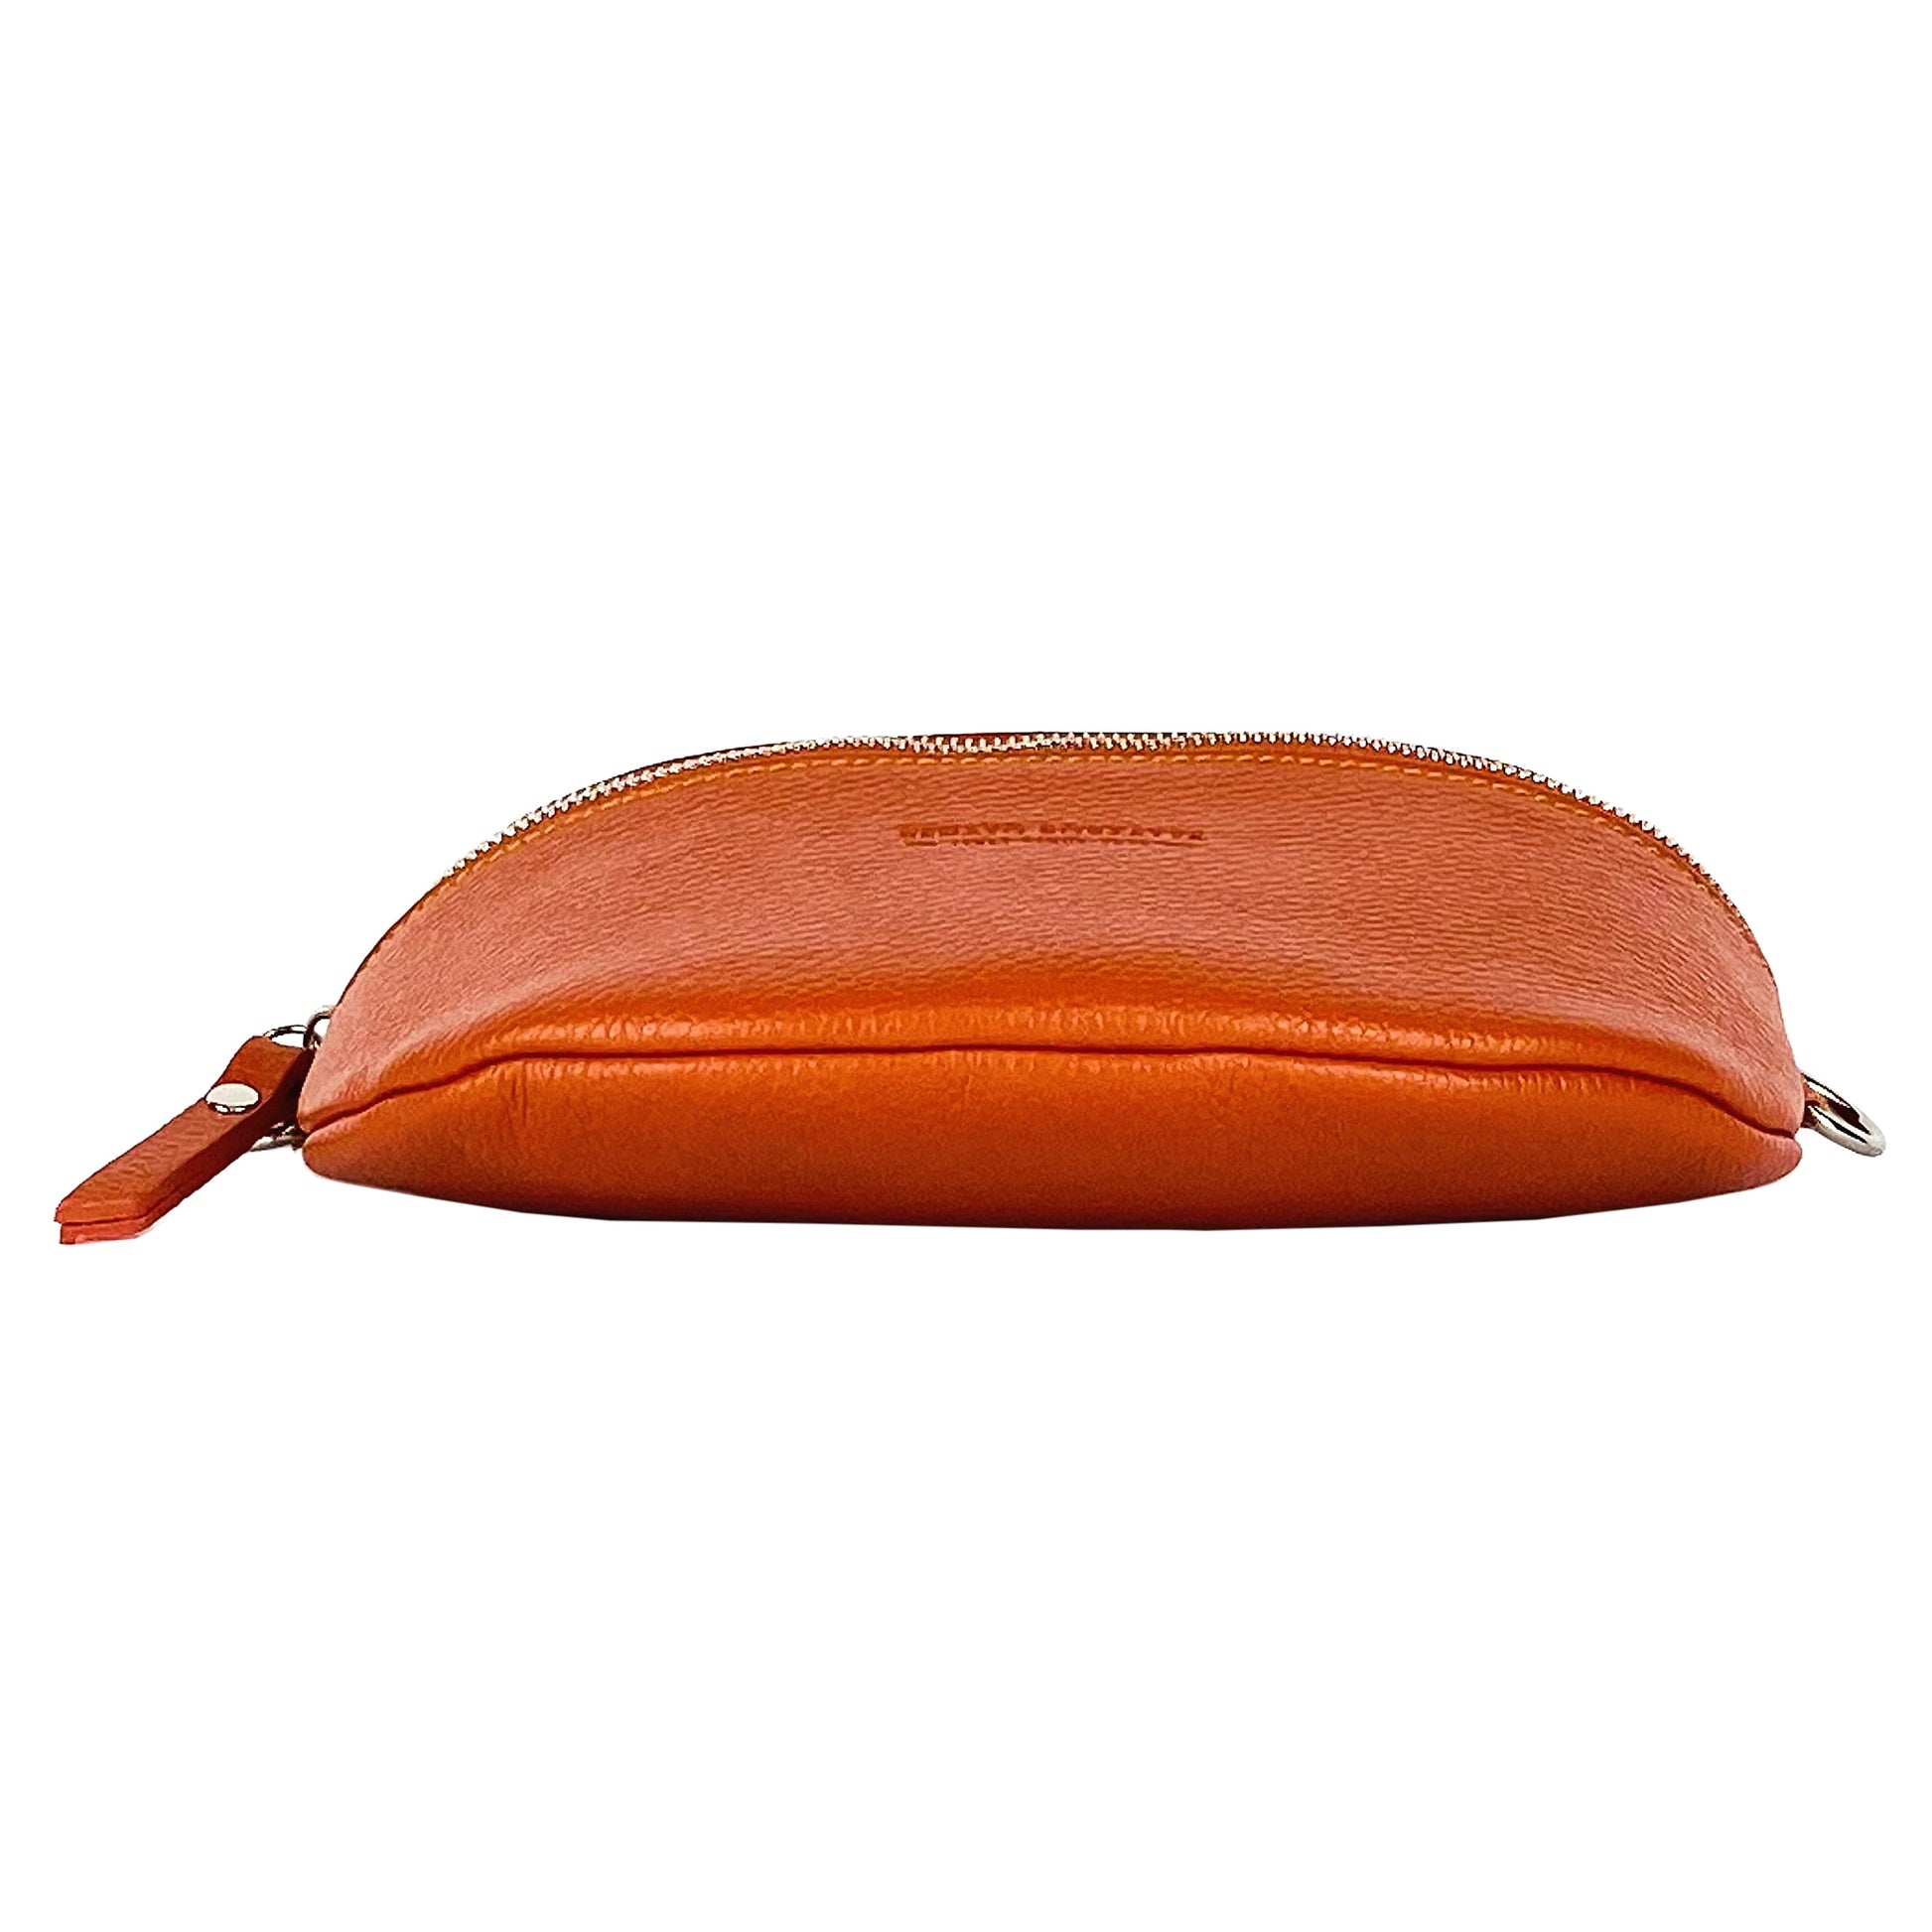 RB1015L | Waist bag with removable shoulder strap in Genuine Leather Made in Italy. Attachments with shiny nickel metal snap hooks - Orange color - Dimensions: 24 x 14 x 7-4